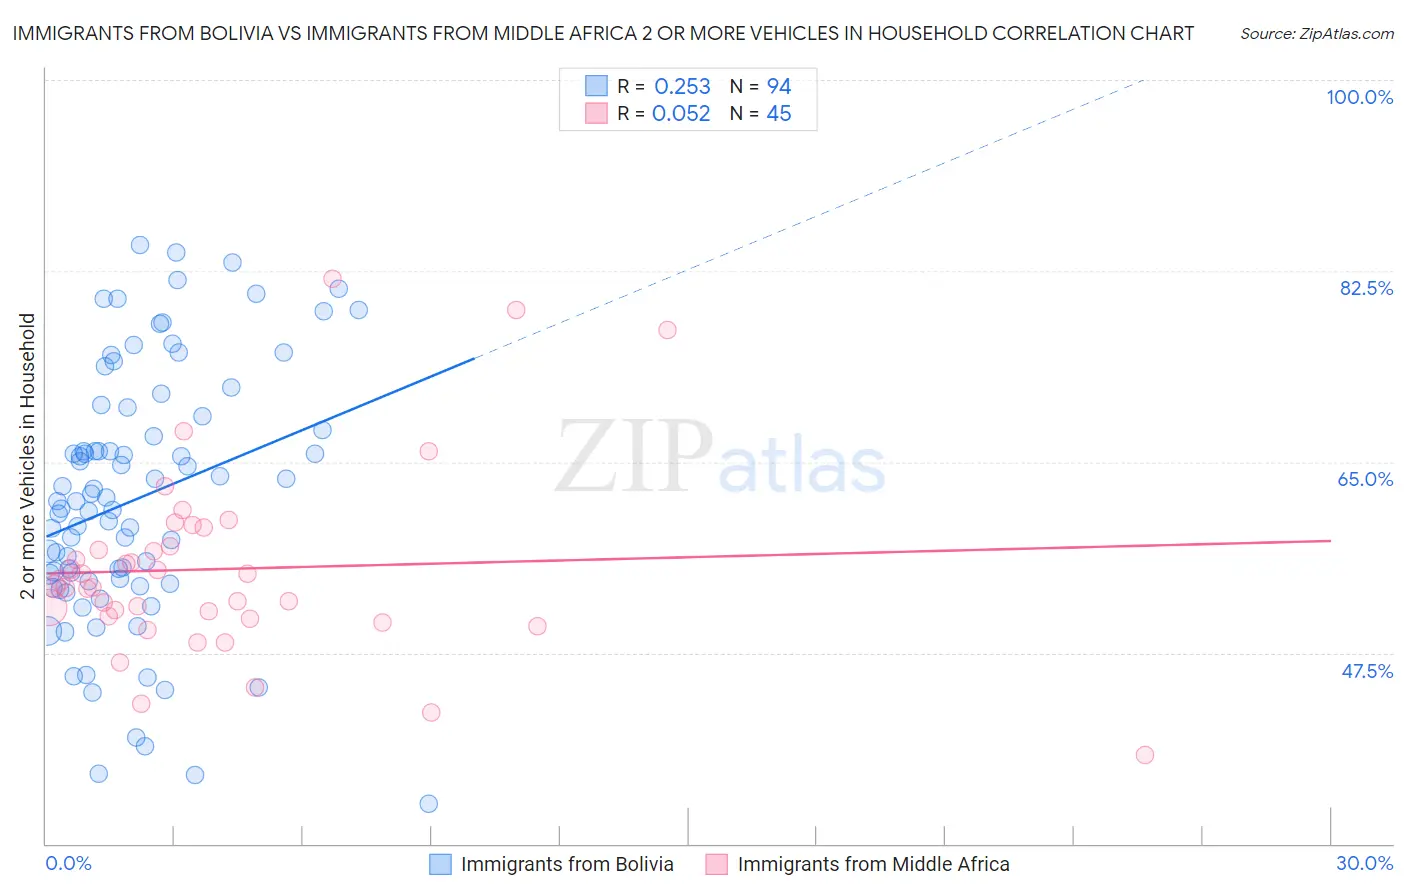 Immigrants from Bolivia vs Immigrants from Middle Africa 2 or more Vehicles in Household